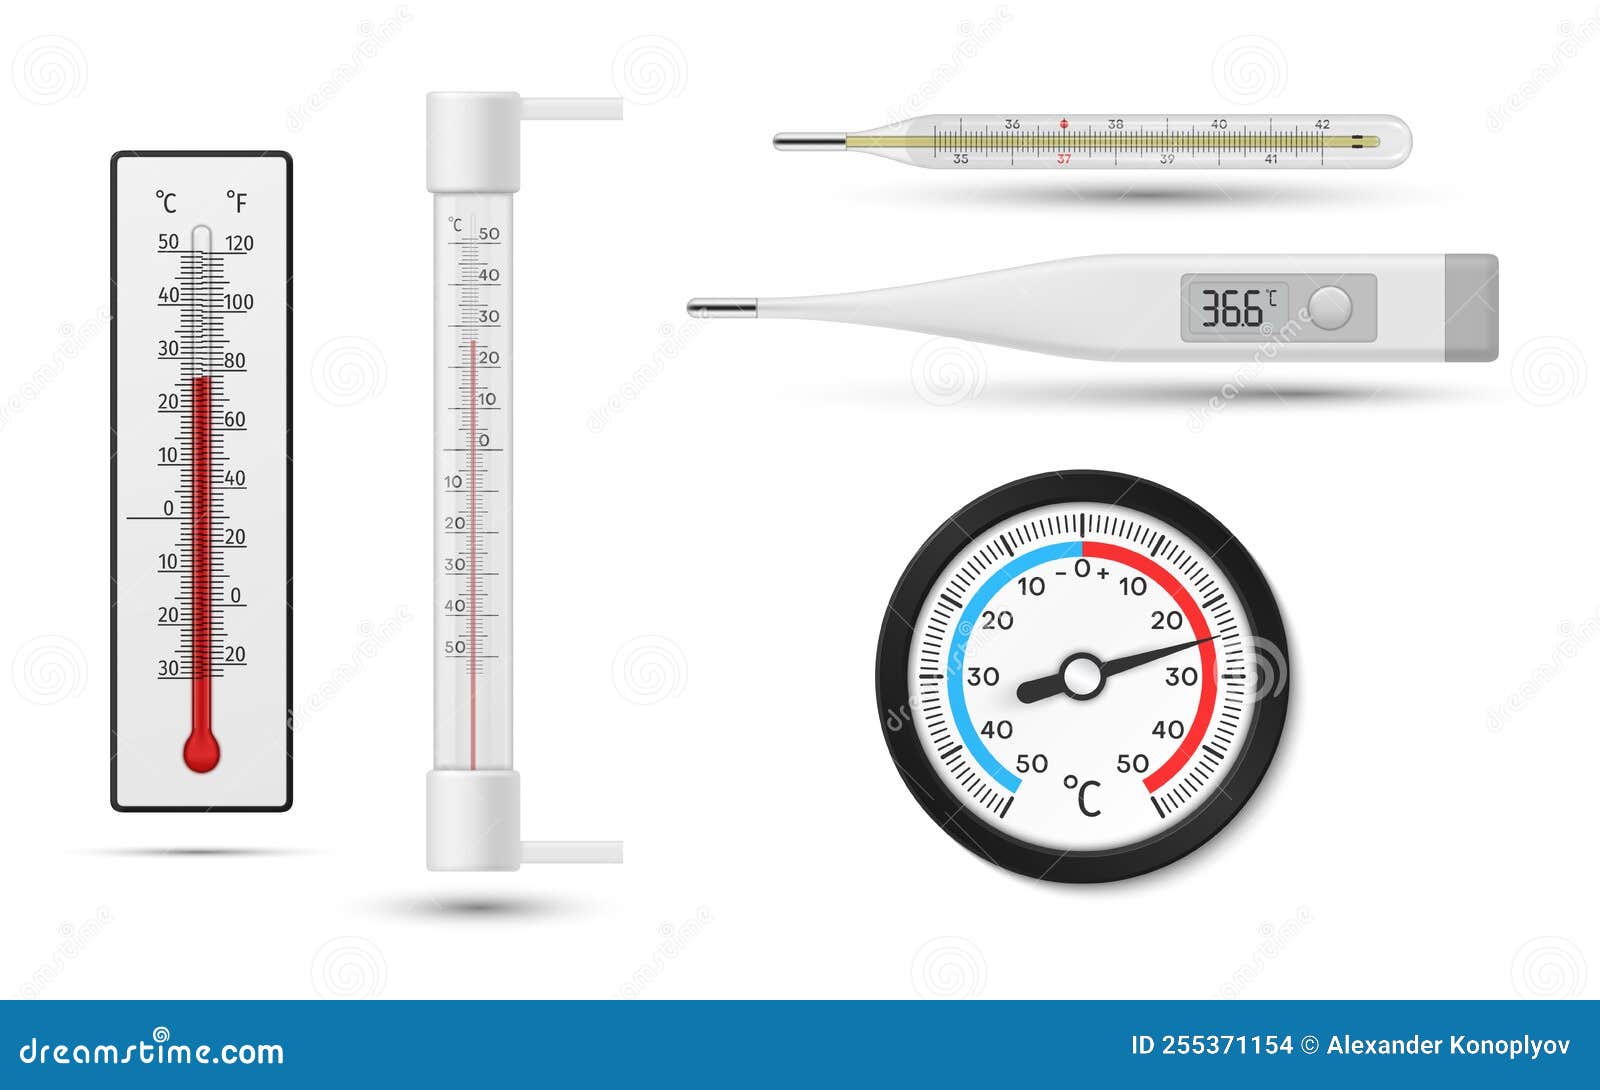 https://thumbs.dreamstime.com/z/thermometers-set-realistic-vector-illustration-tools-determining-temperature-thermometers-set-realistic-vector-illustration-255371154.jpg